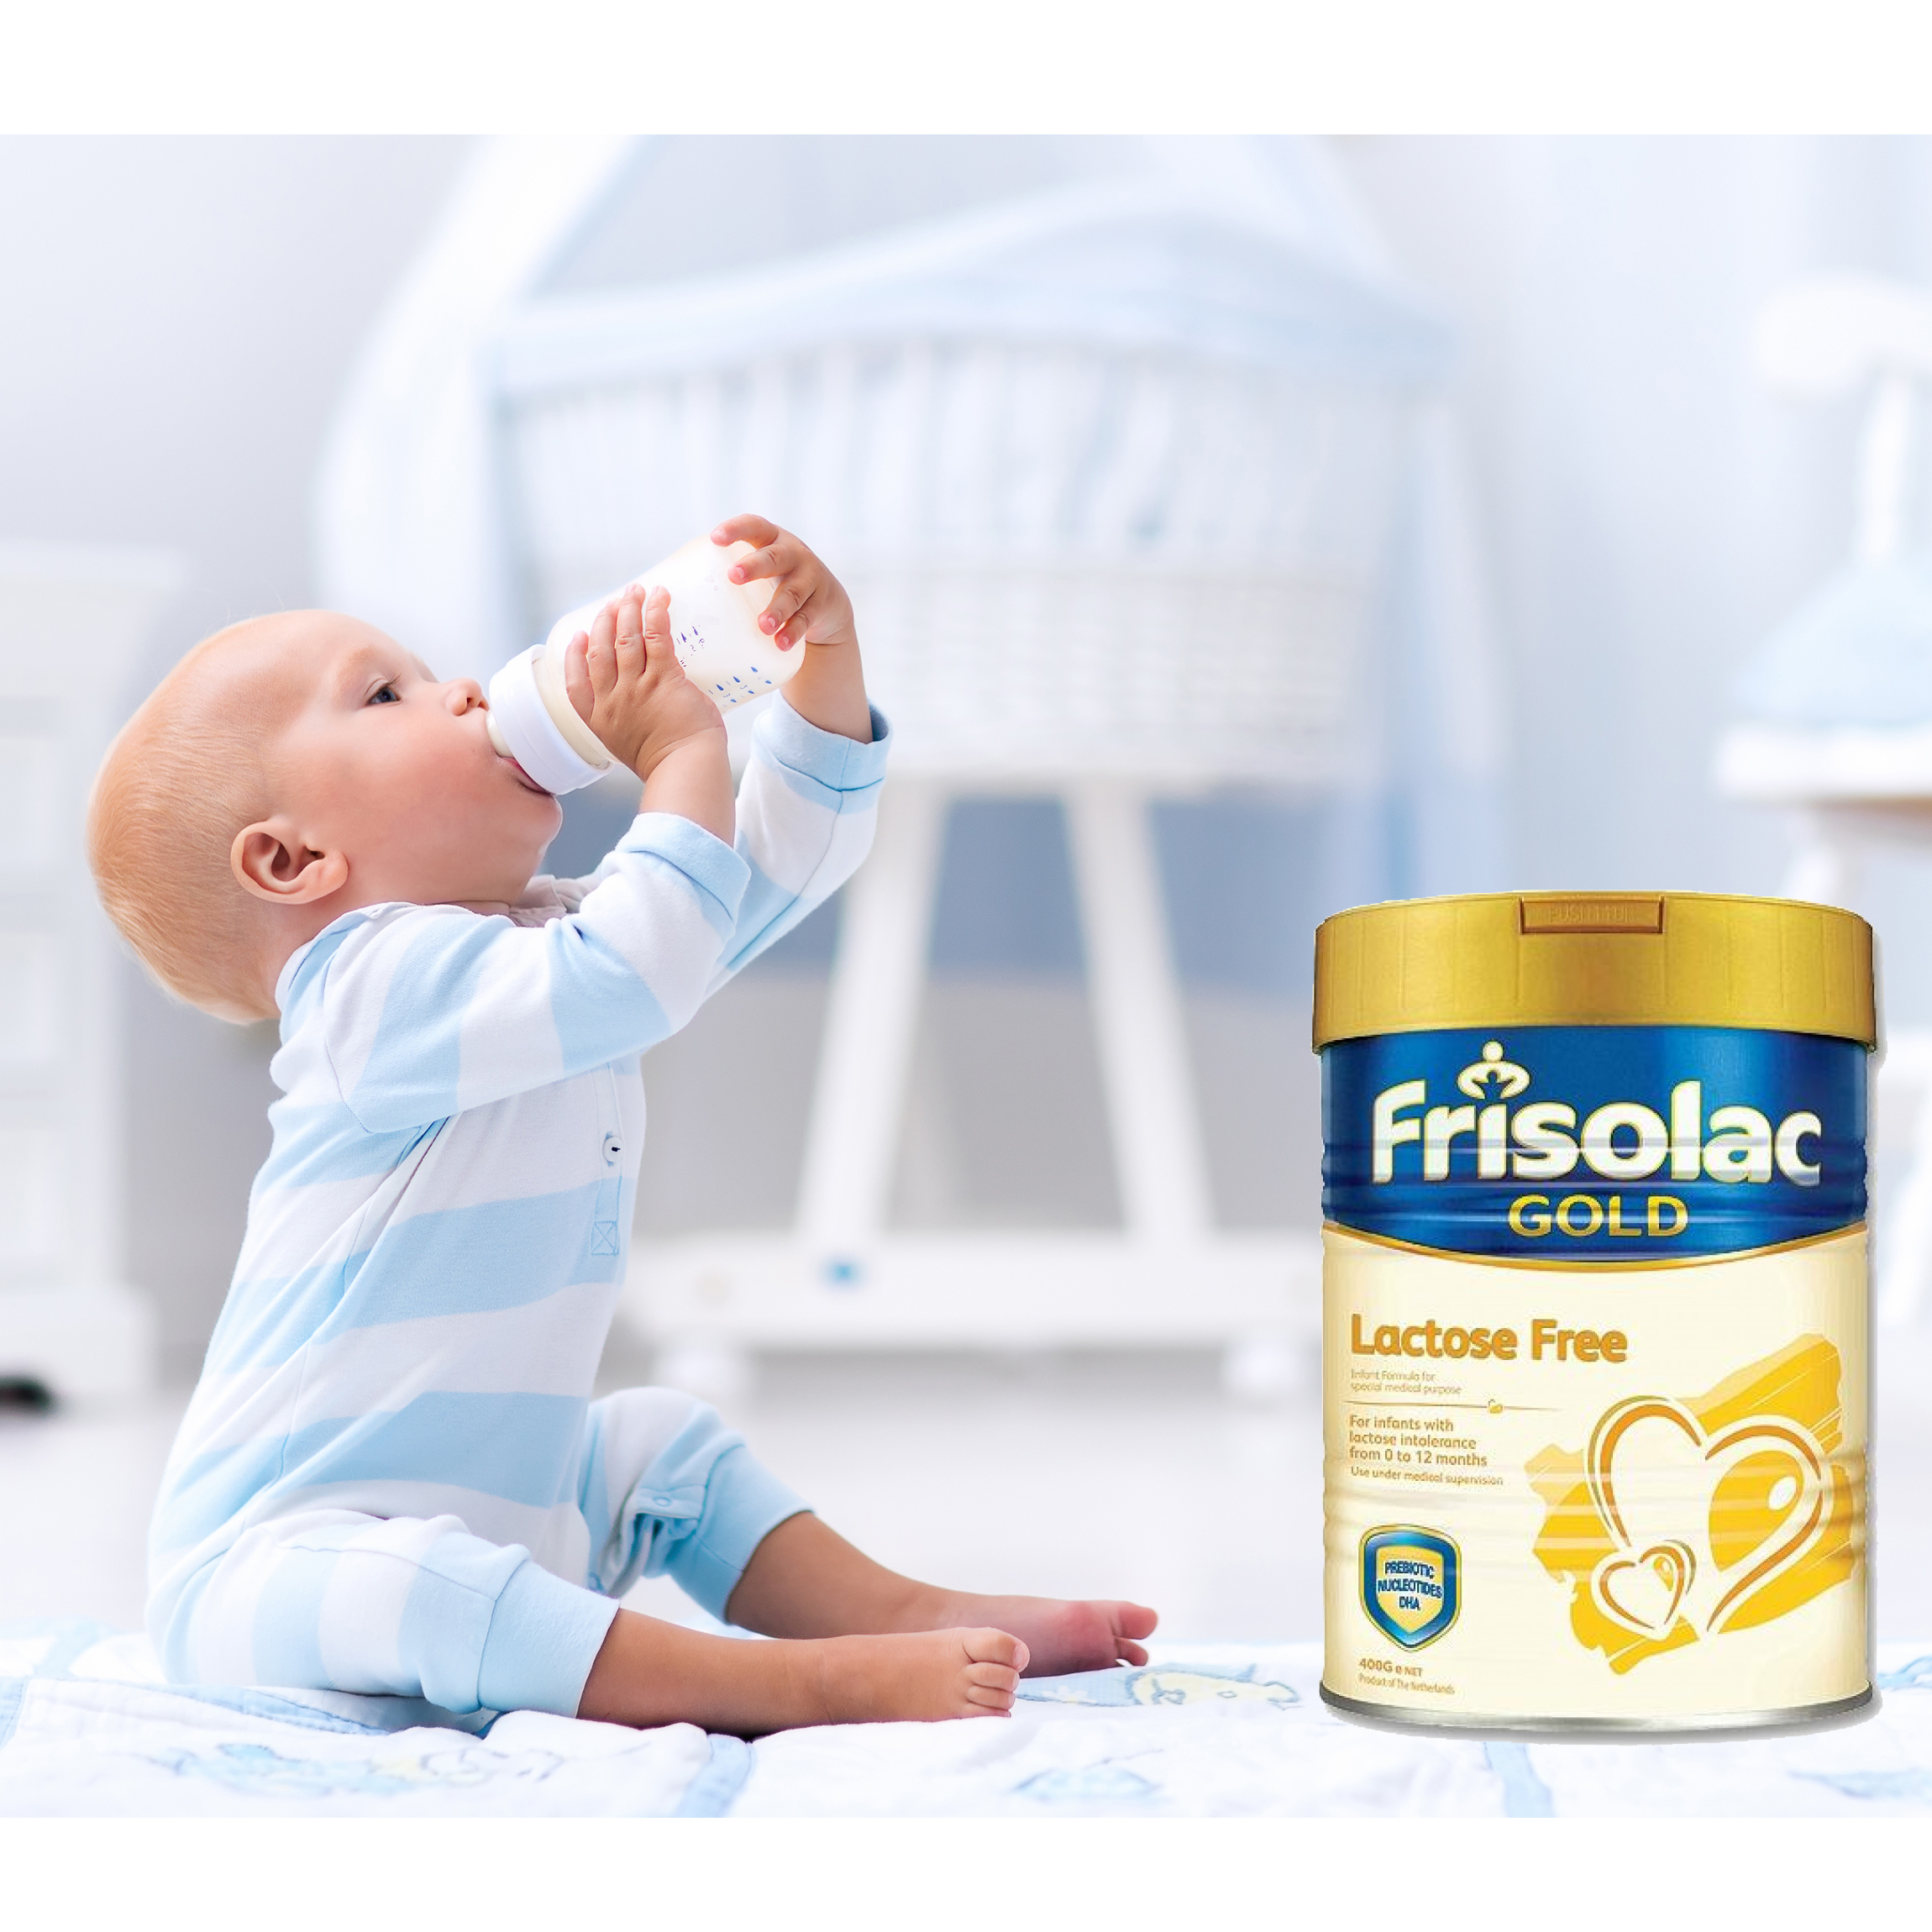 Frisolac-Gold-Lactose-Free-3